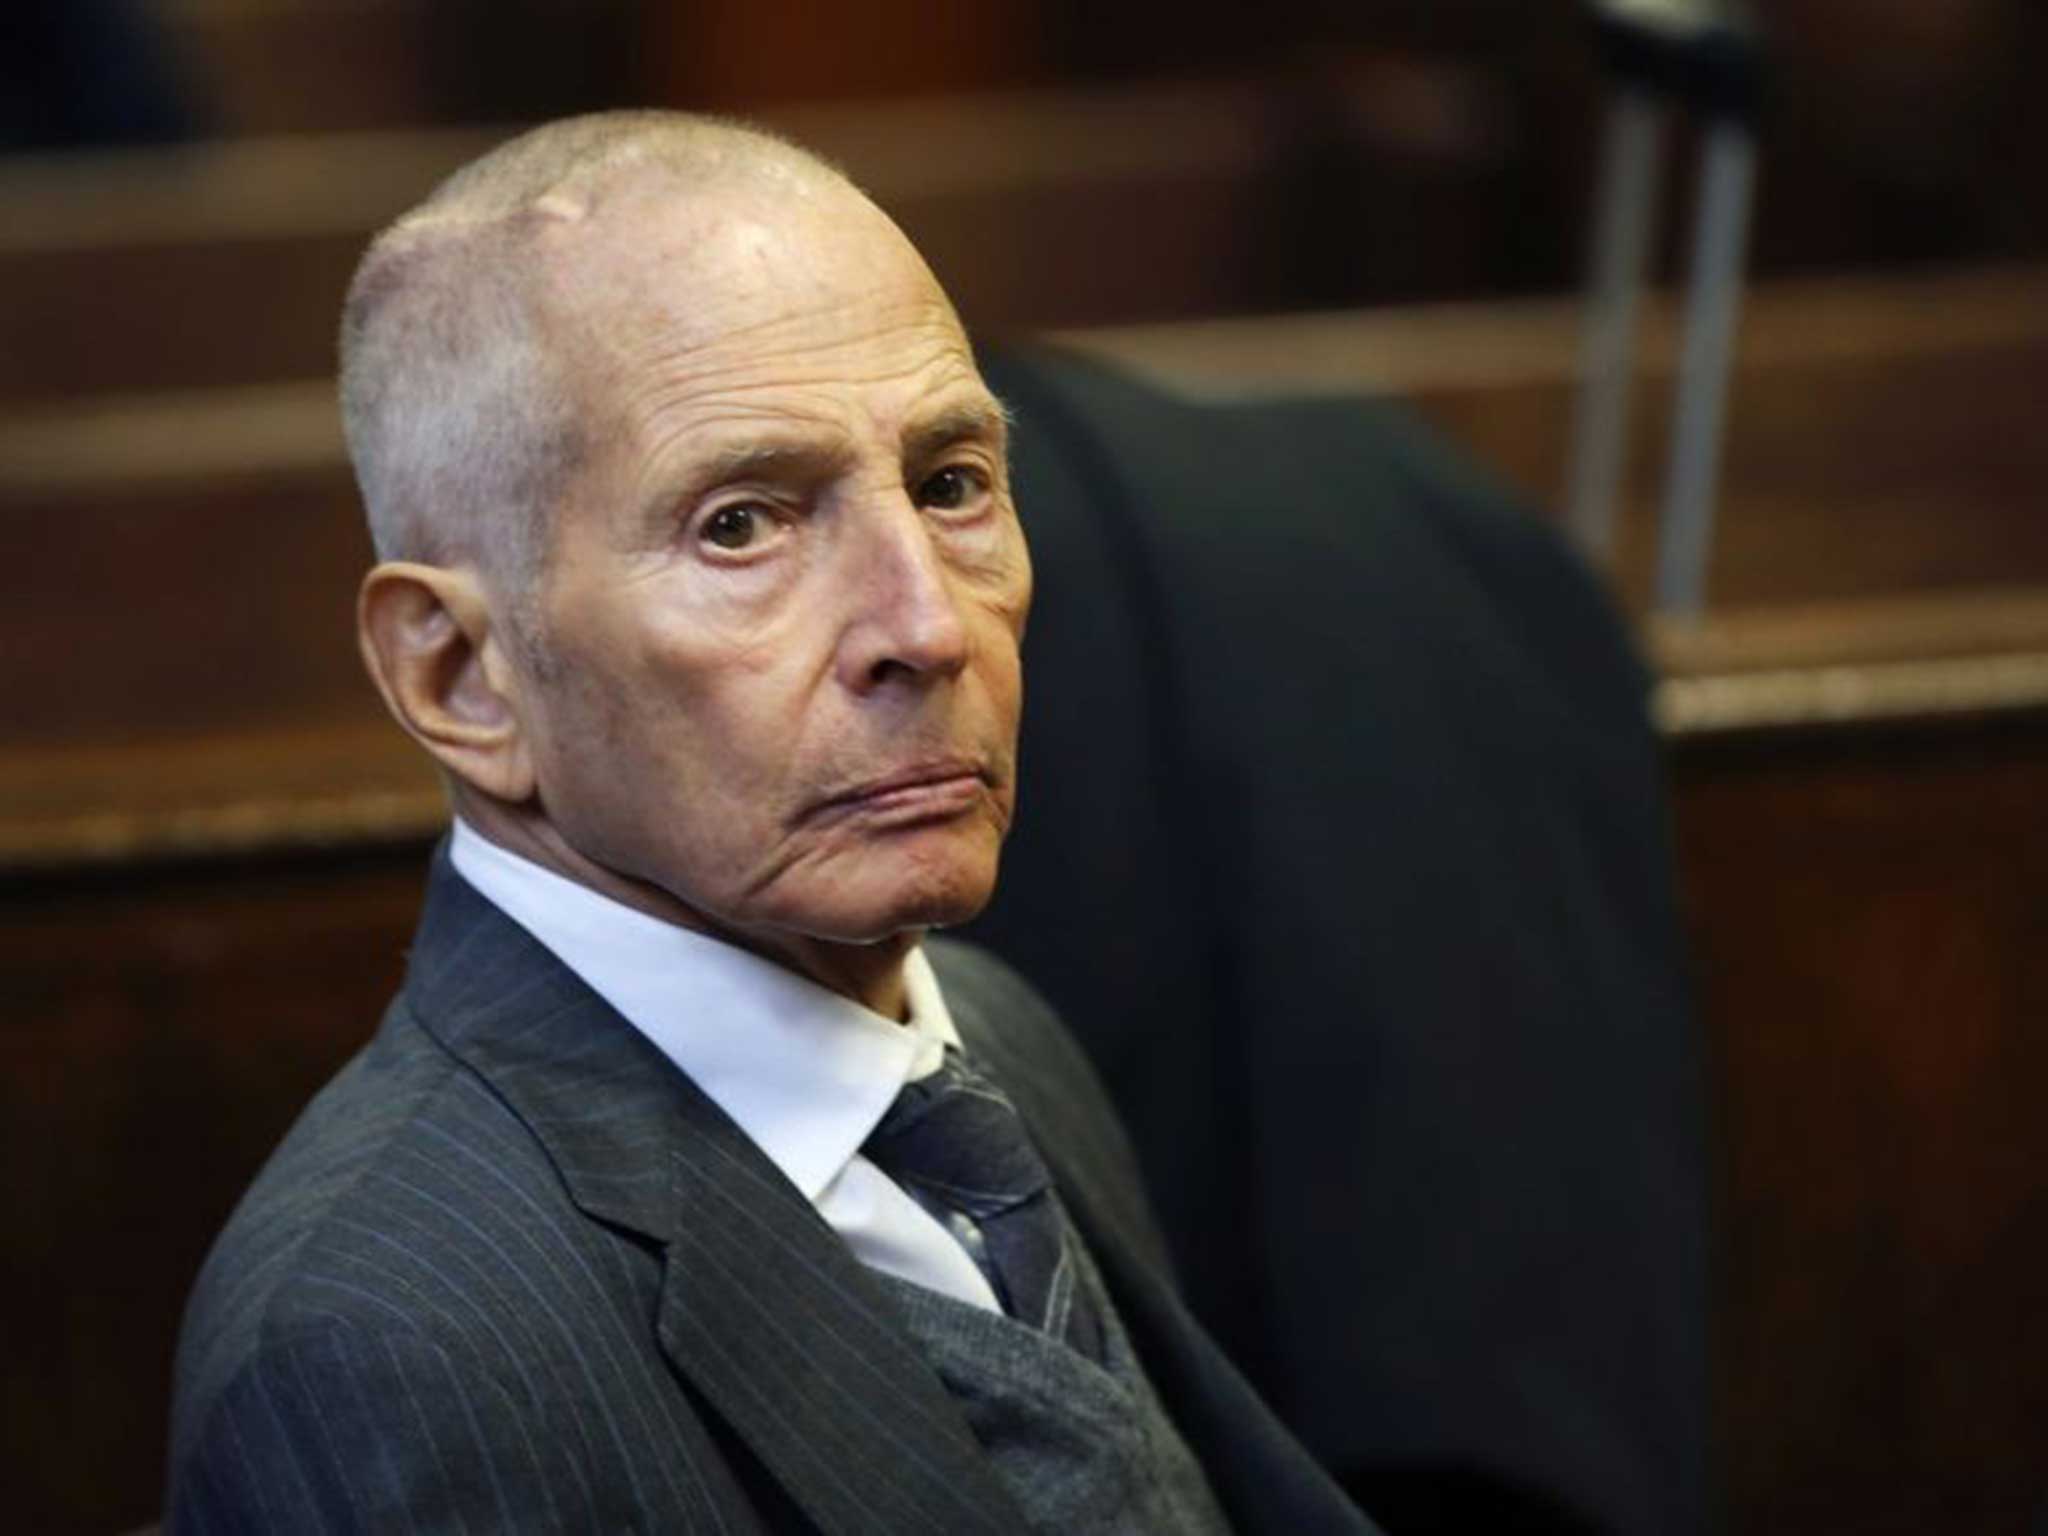 Serial suspect: the property heir charged with first-degree murder, Robert Durst